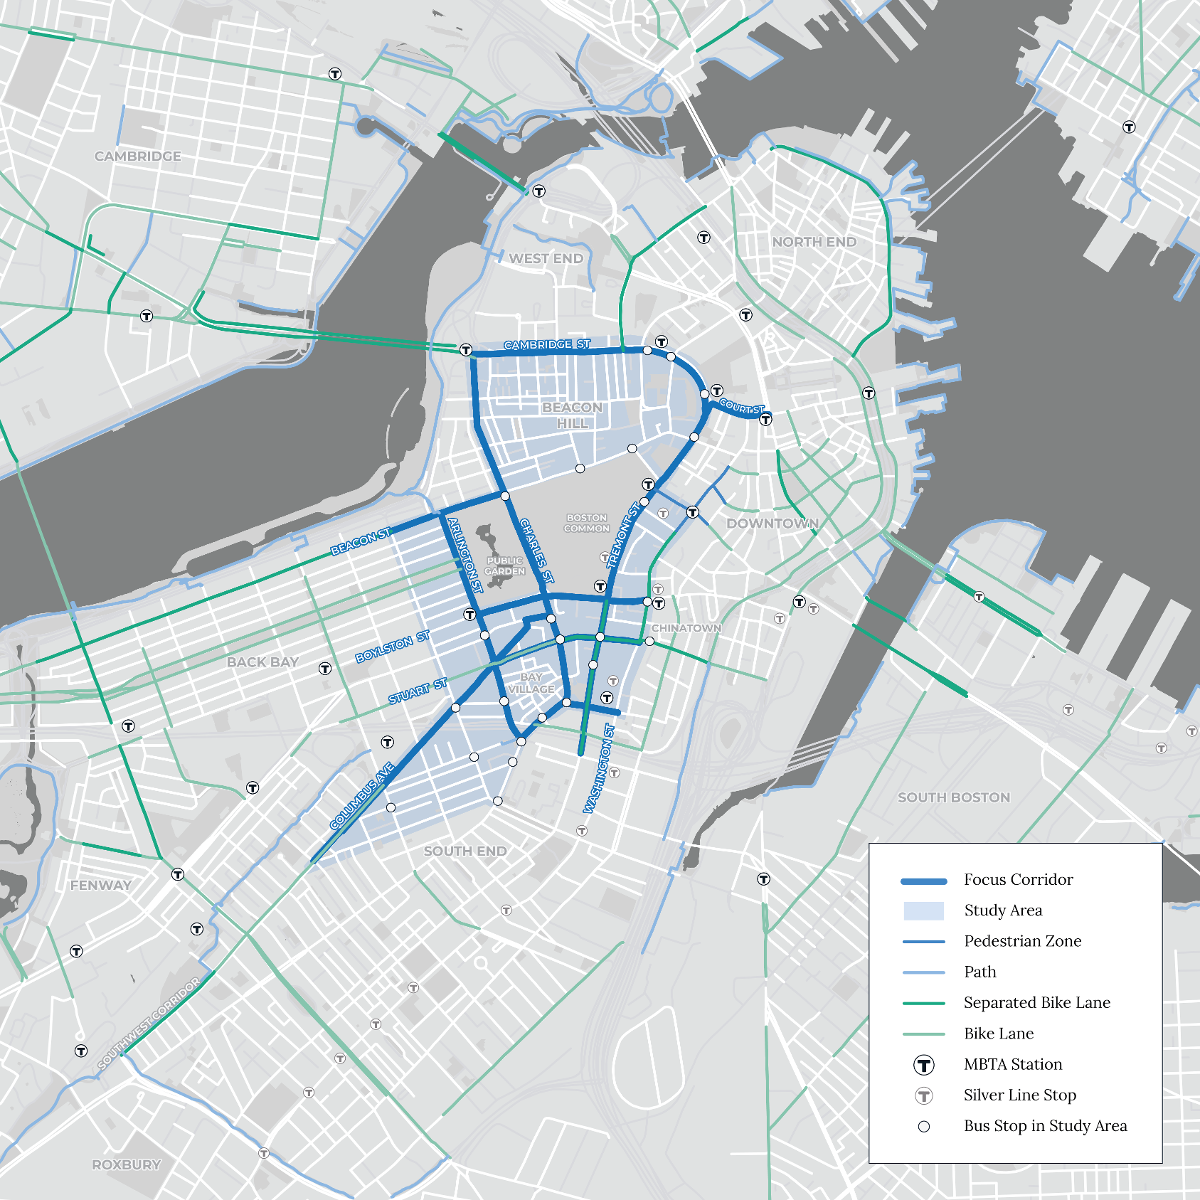 A map shows the study area of the Connect Downtown project. Focus corridors include Arlington Street, Beacon Street, Boylston Street, Cambridge Street, Charles Street, Charles Street South, Court Street, Columbus Avenue, Stuart Street, and Tremont Street.